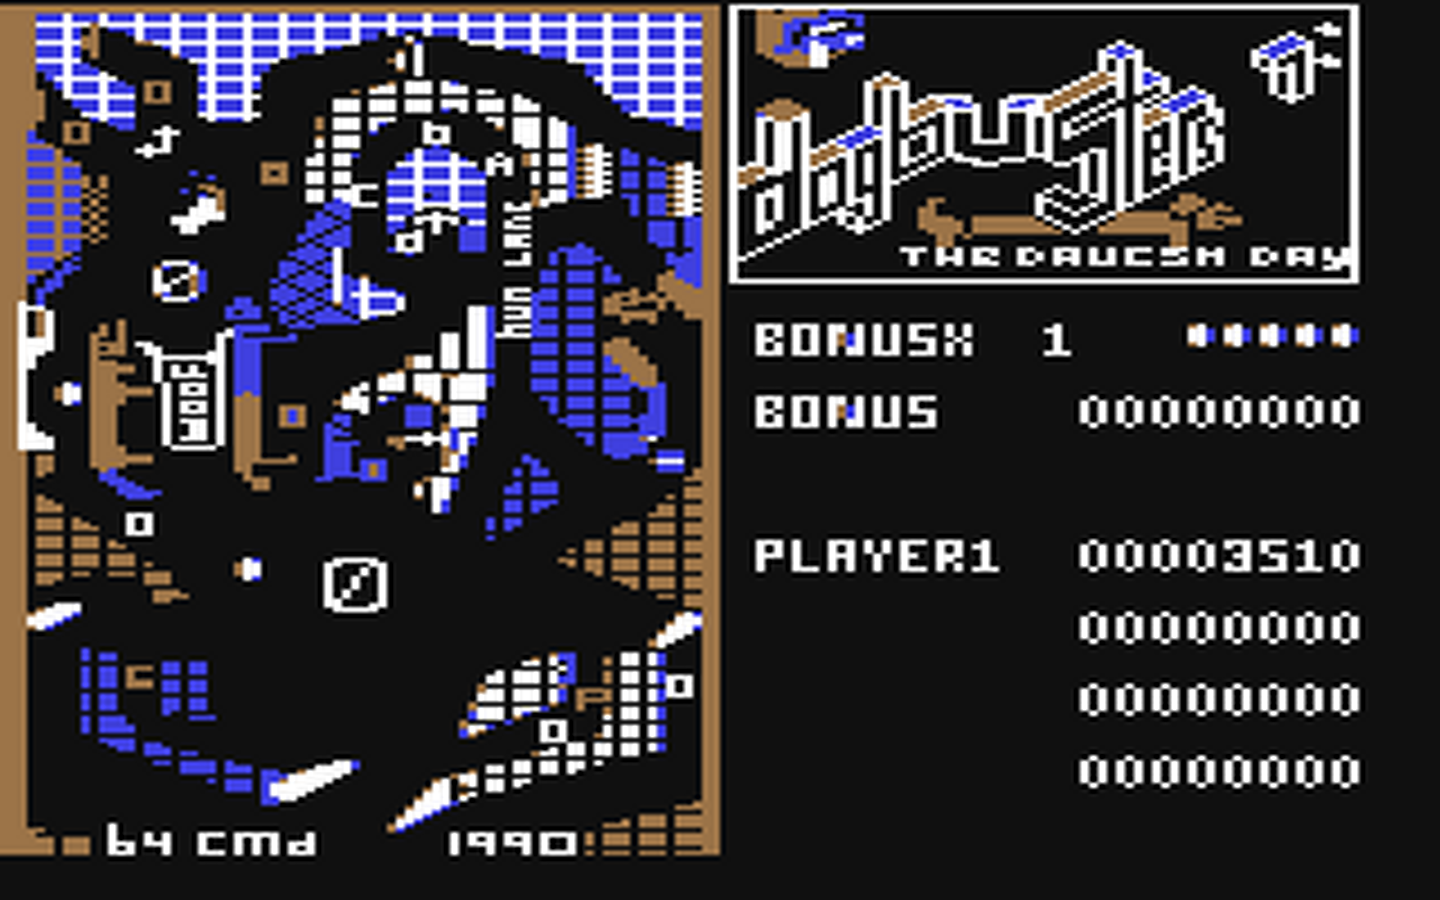 C64 GameBase Dogbusters_VII_-_The_Daucsh_Day (Created_with_PCS) 1991